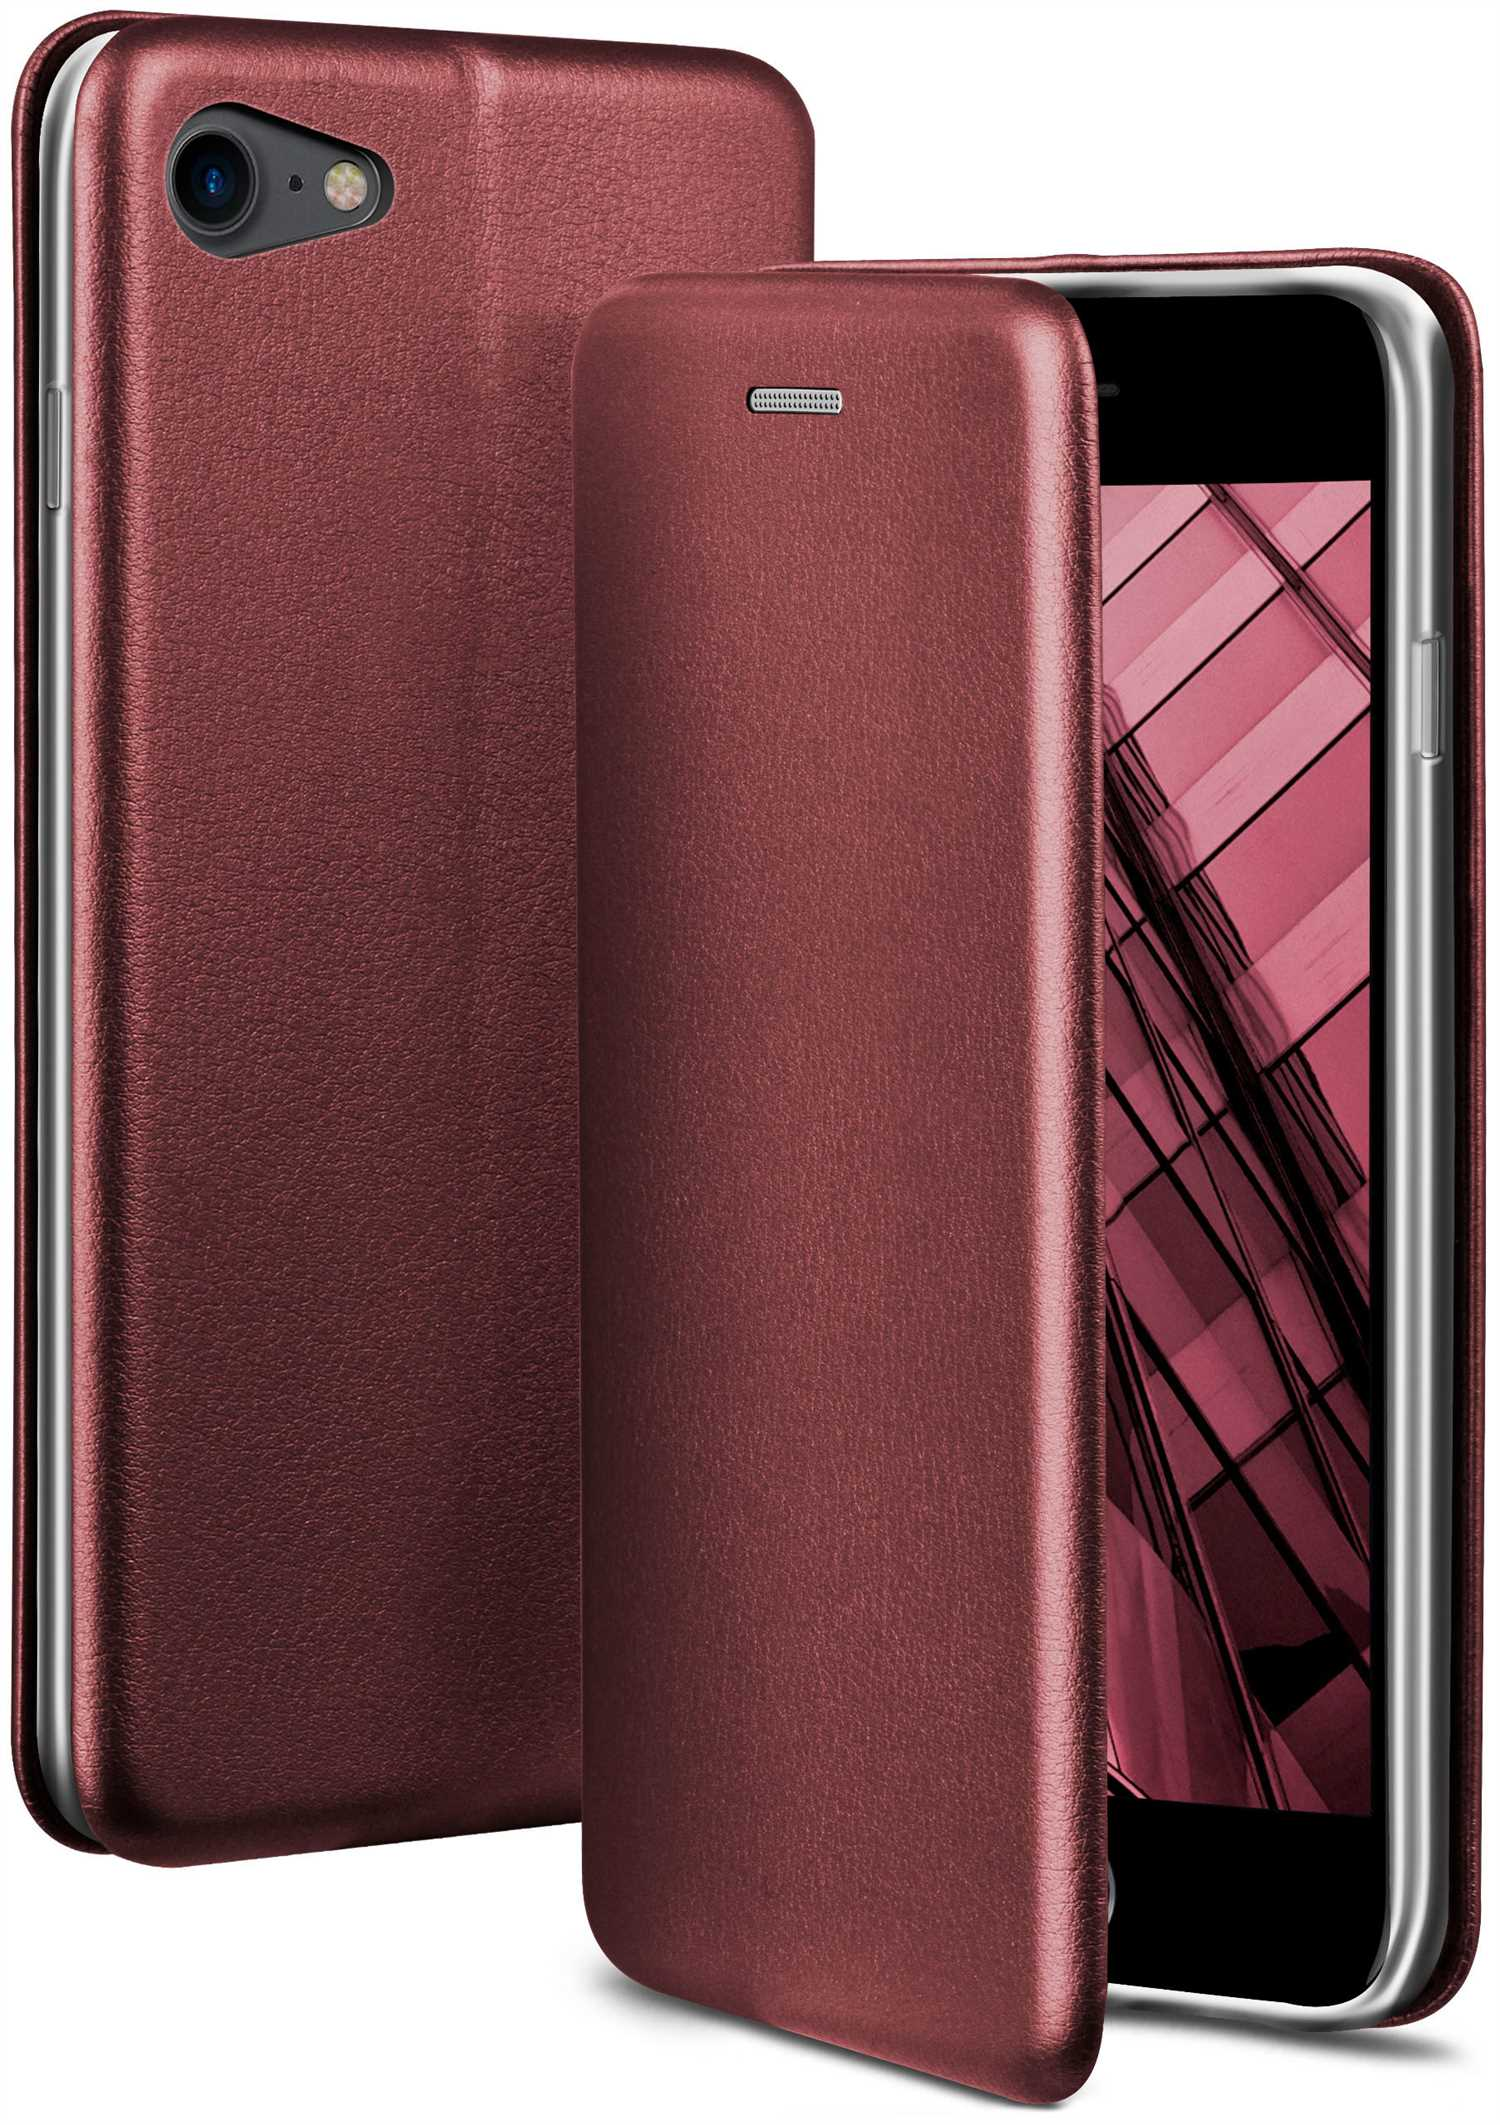 8, Case, ONEFLOW iPhone Business Flip Burgund Red Cover, - Apple,